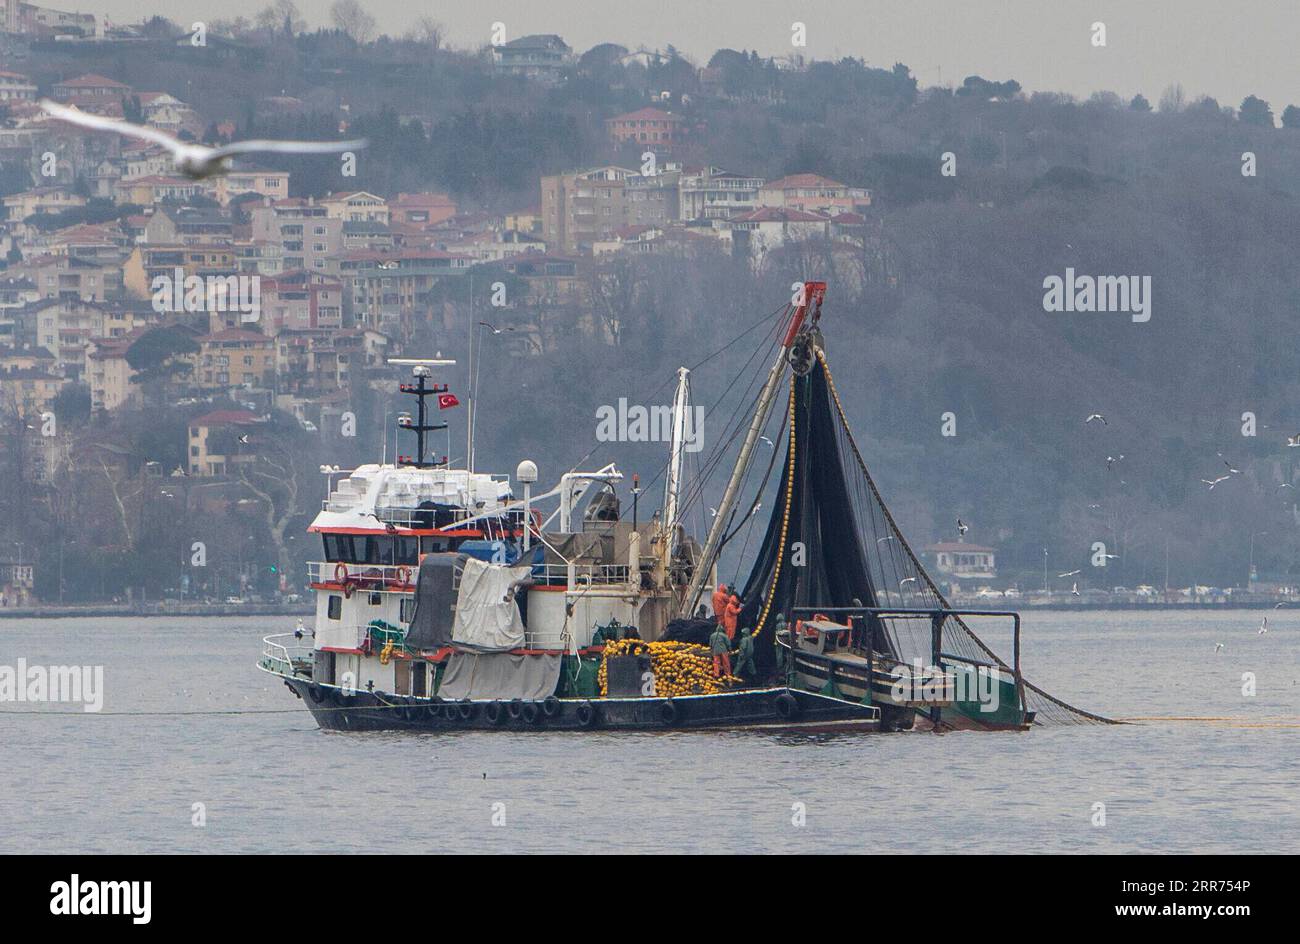 210312 -- ISTANBUL, March 12, 2021 -- A fishing boat is seen on the Black Sea in Istanbul, Turkey, on March 6, 2021. The Black Sea is packed with local bottom fishes, including haddock, mullet, and turbot. There are also migrating fishes from the Atlantic Sea, such as bonito, bluefish, anchovy, and horse-mackerel. However, climate change, overfishing, and other natural causes have had tremendous adverse impacts on the stocks of fisheries and aquaculture. Restrictions related to the COVID-19 pandemic, as well as the rising costs of labor, fuel, and equipment also preoccupy the fishermen. Photo Stock Photo